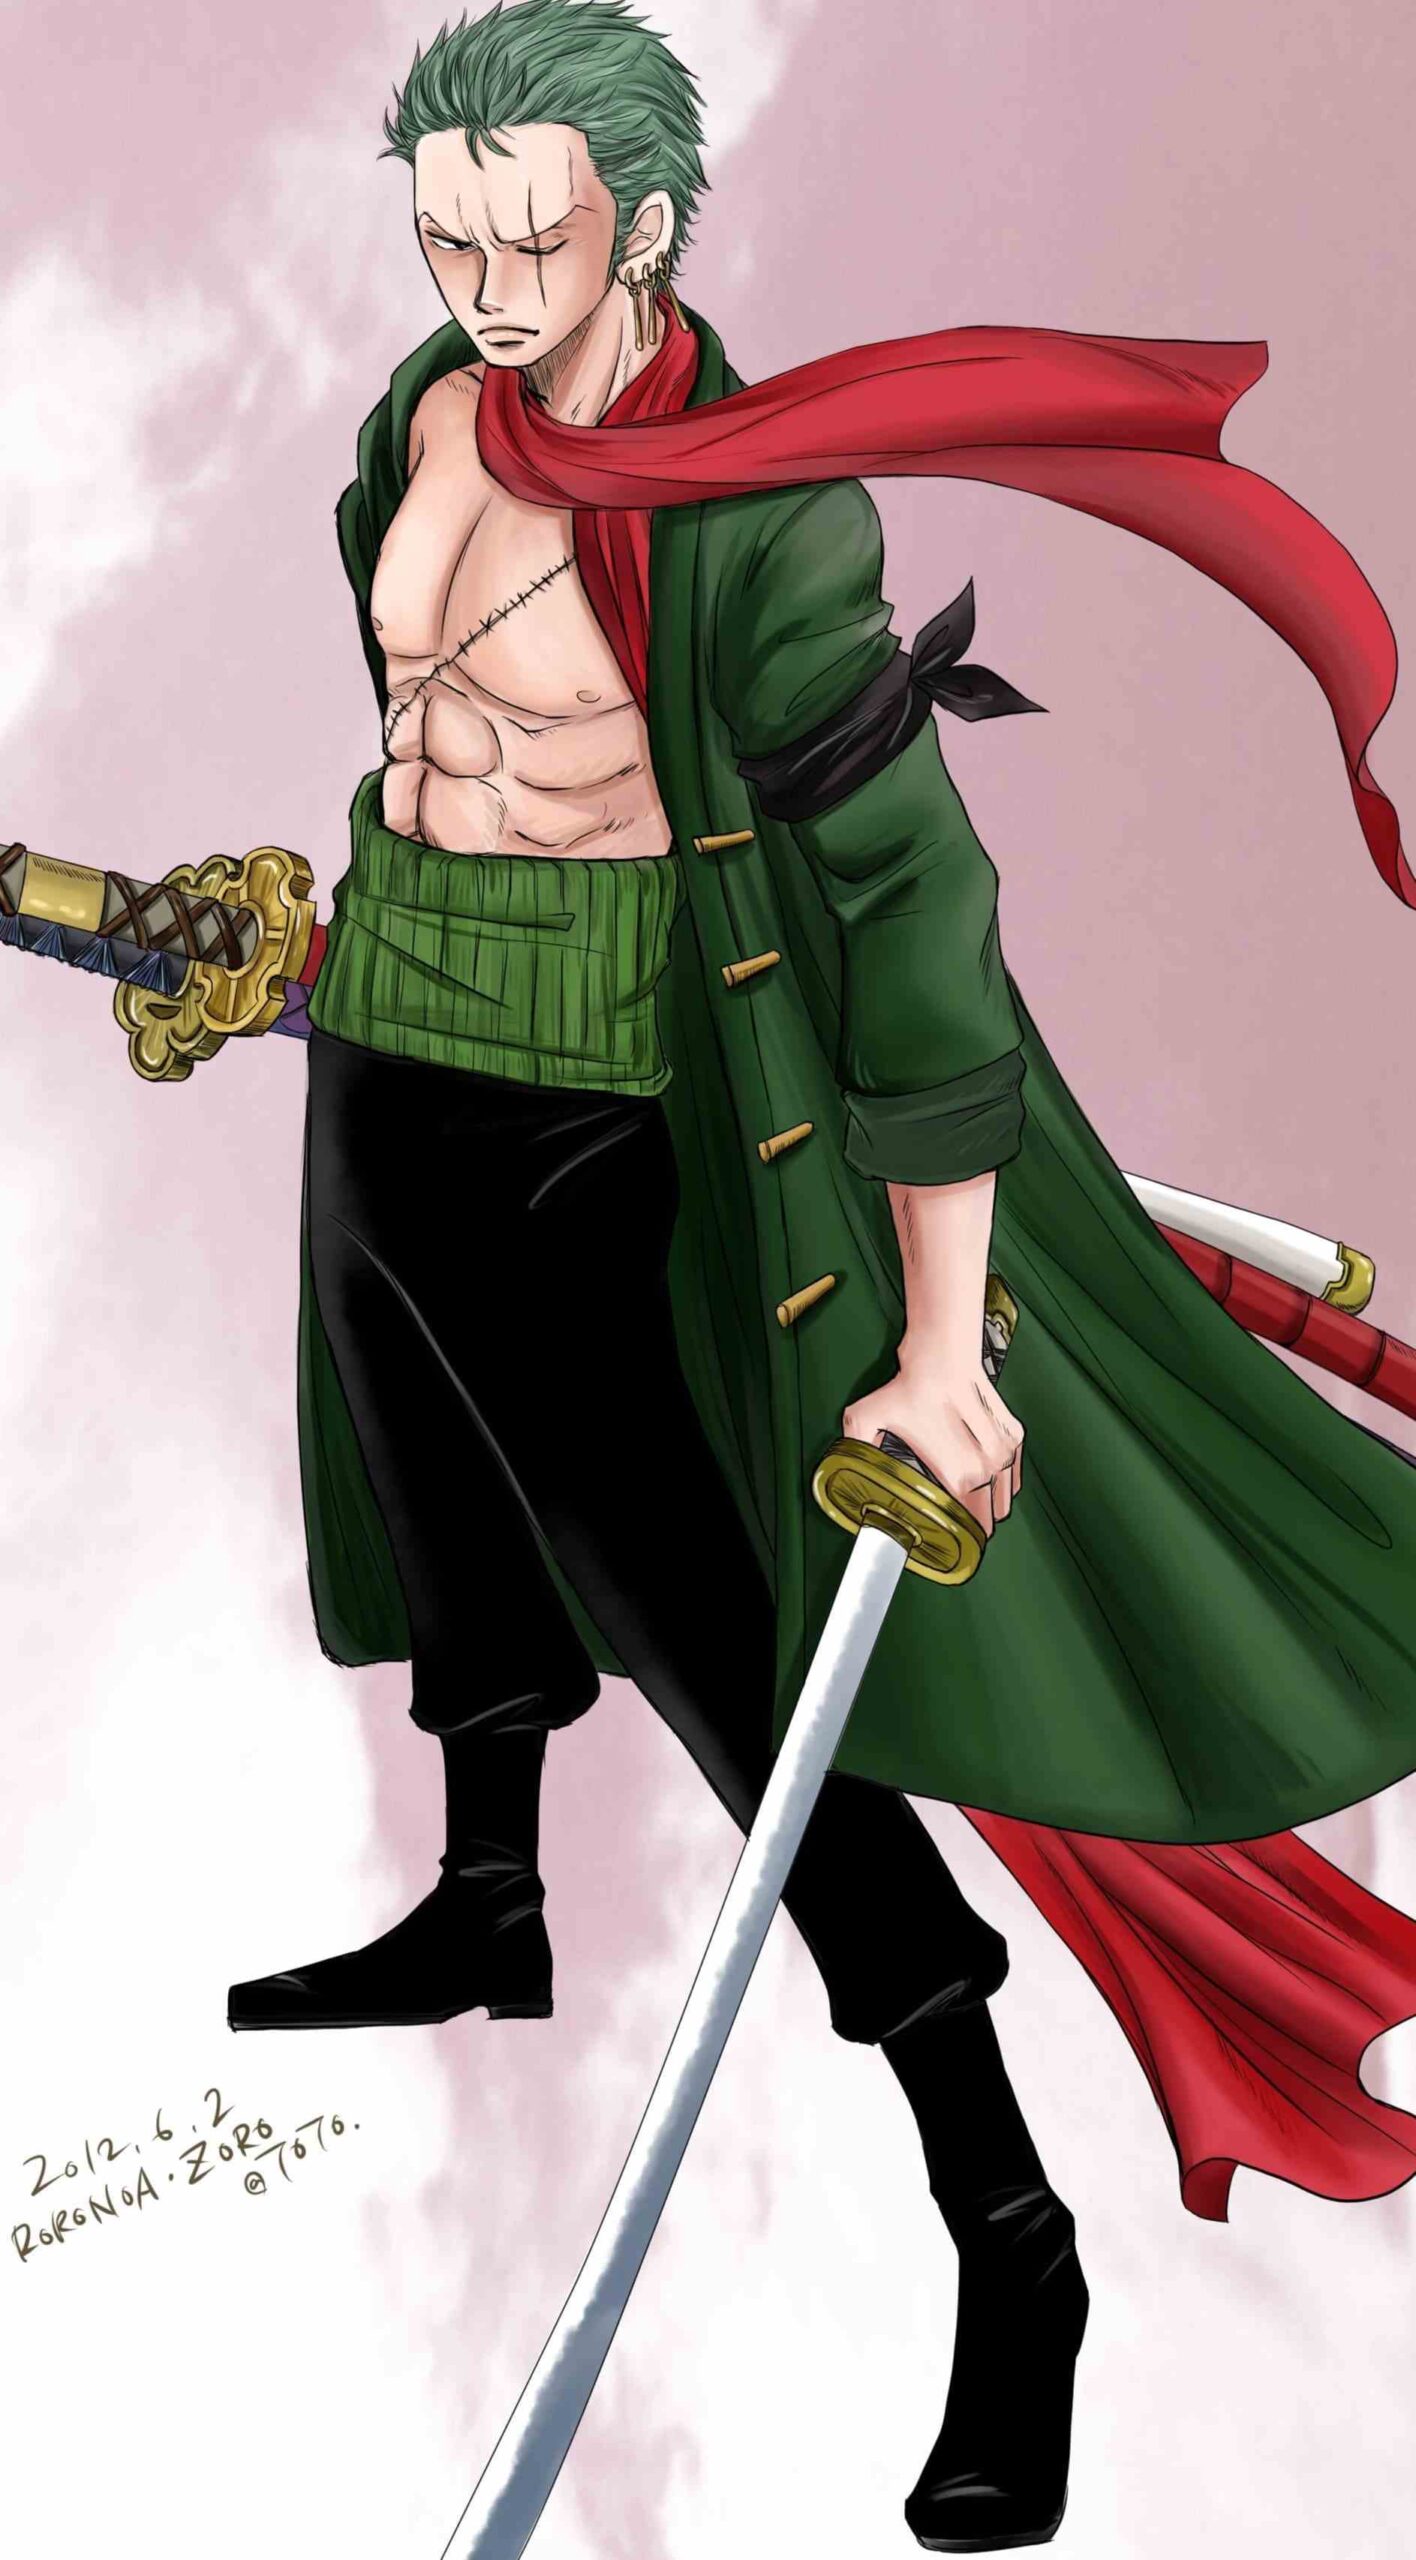 4K wallpaper Roronoa Zoro of One Piece wallpaper anime adult one person iphone 13 wallpaper, Best iPhone Wallpaper and iPhone background, WallpaperUpdate, Best iPhone Wallpaper and iPhone background